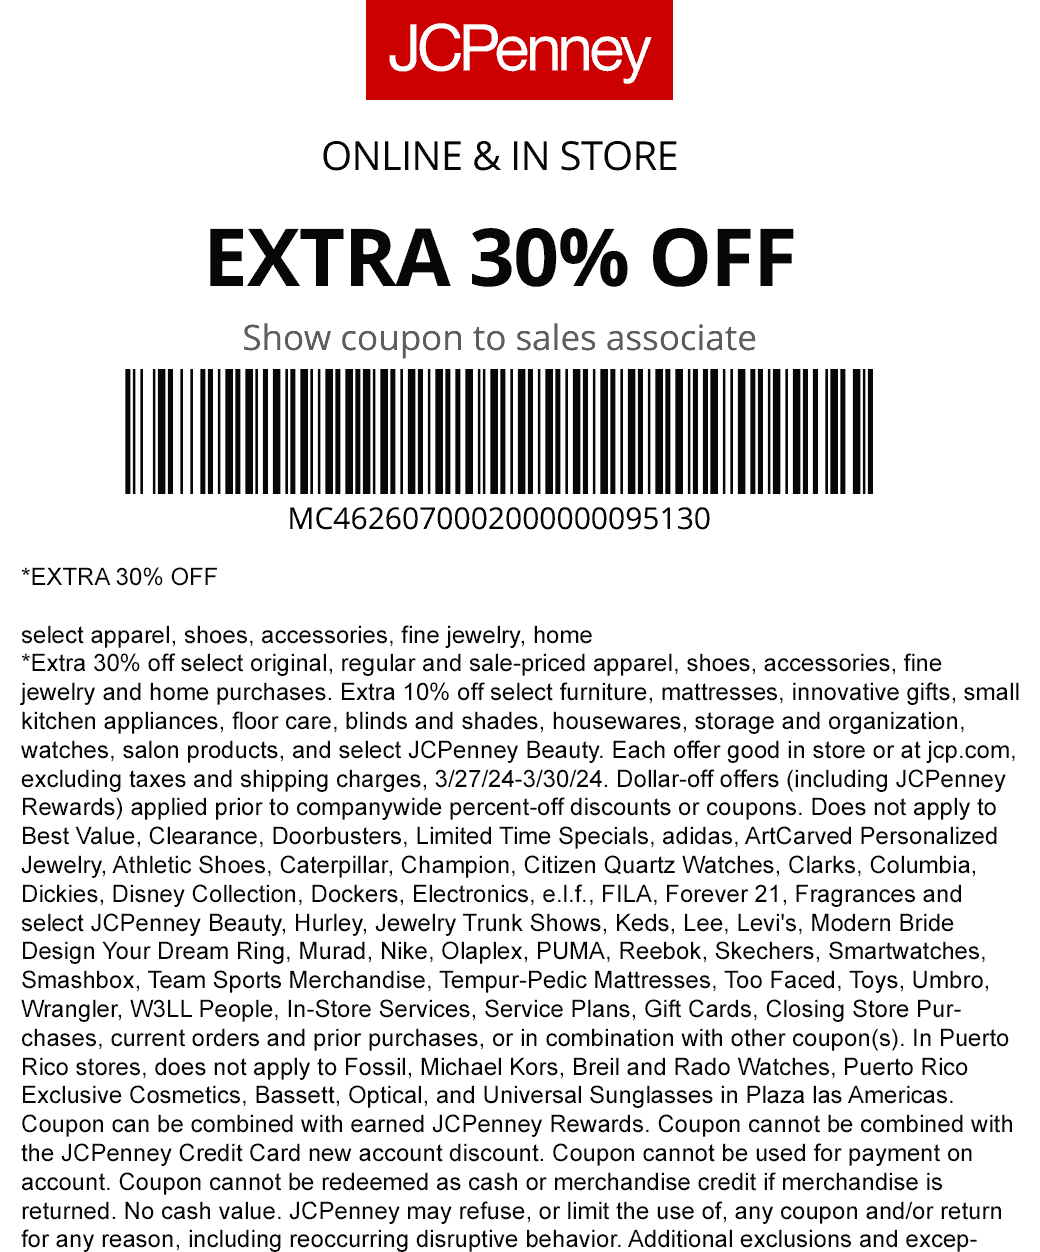 JCPenney stores Coupon  Extra 30% off today at JCPenney, or online via promo code BASKET30 #jcpenney 